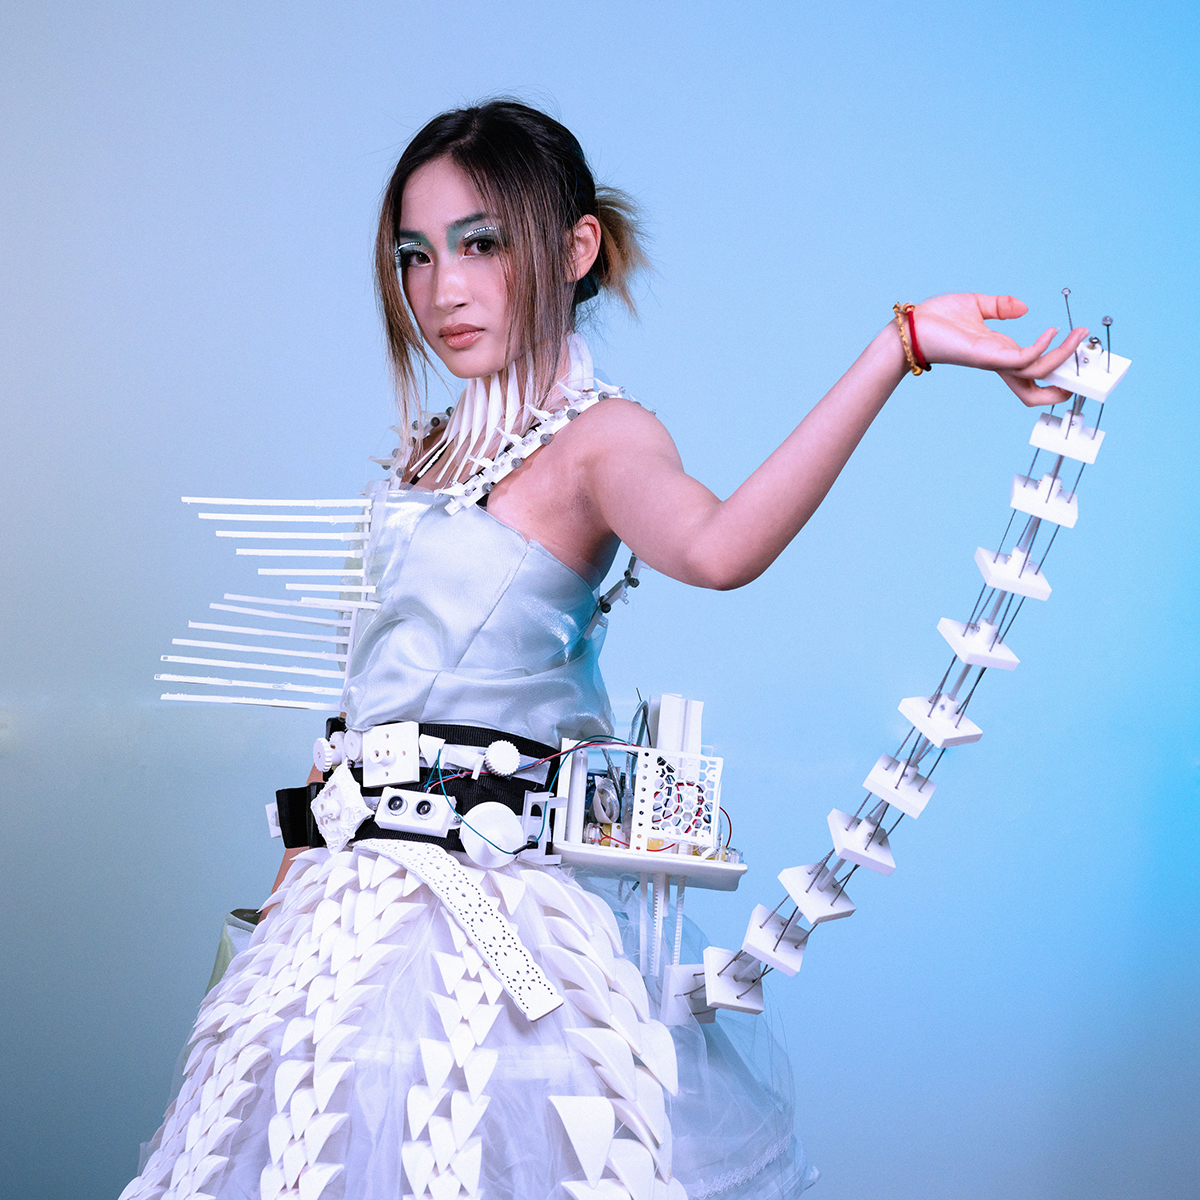 A model standing in white gown fashioned with electronics.